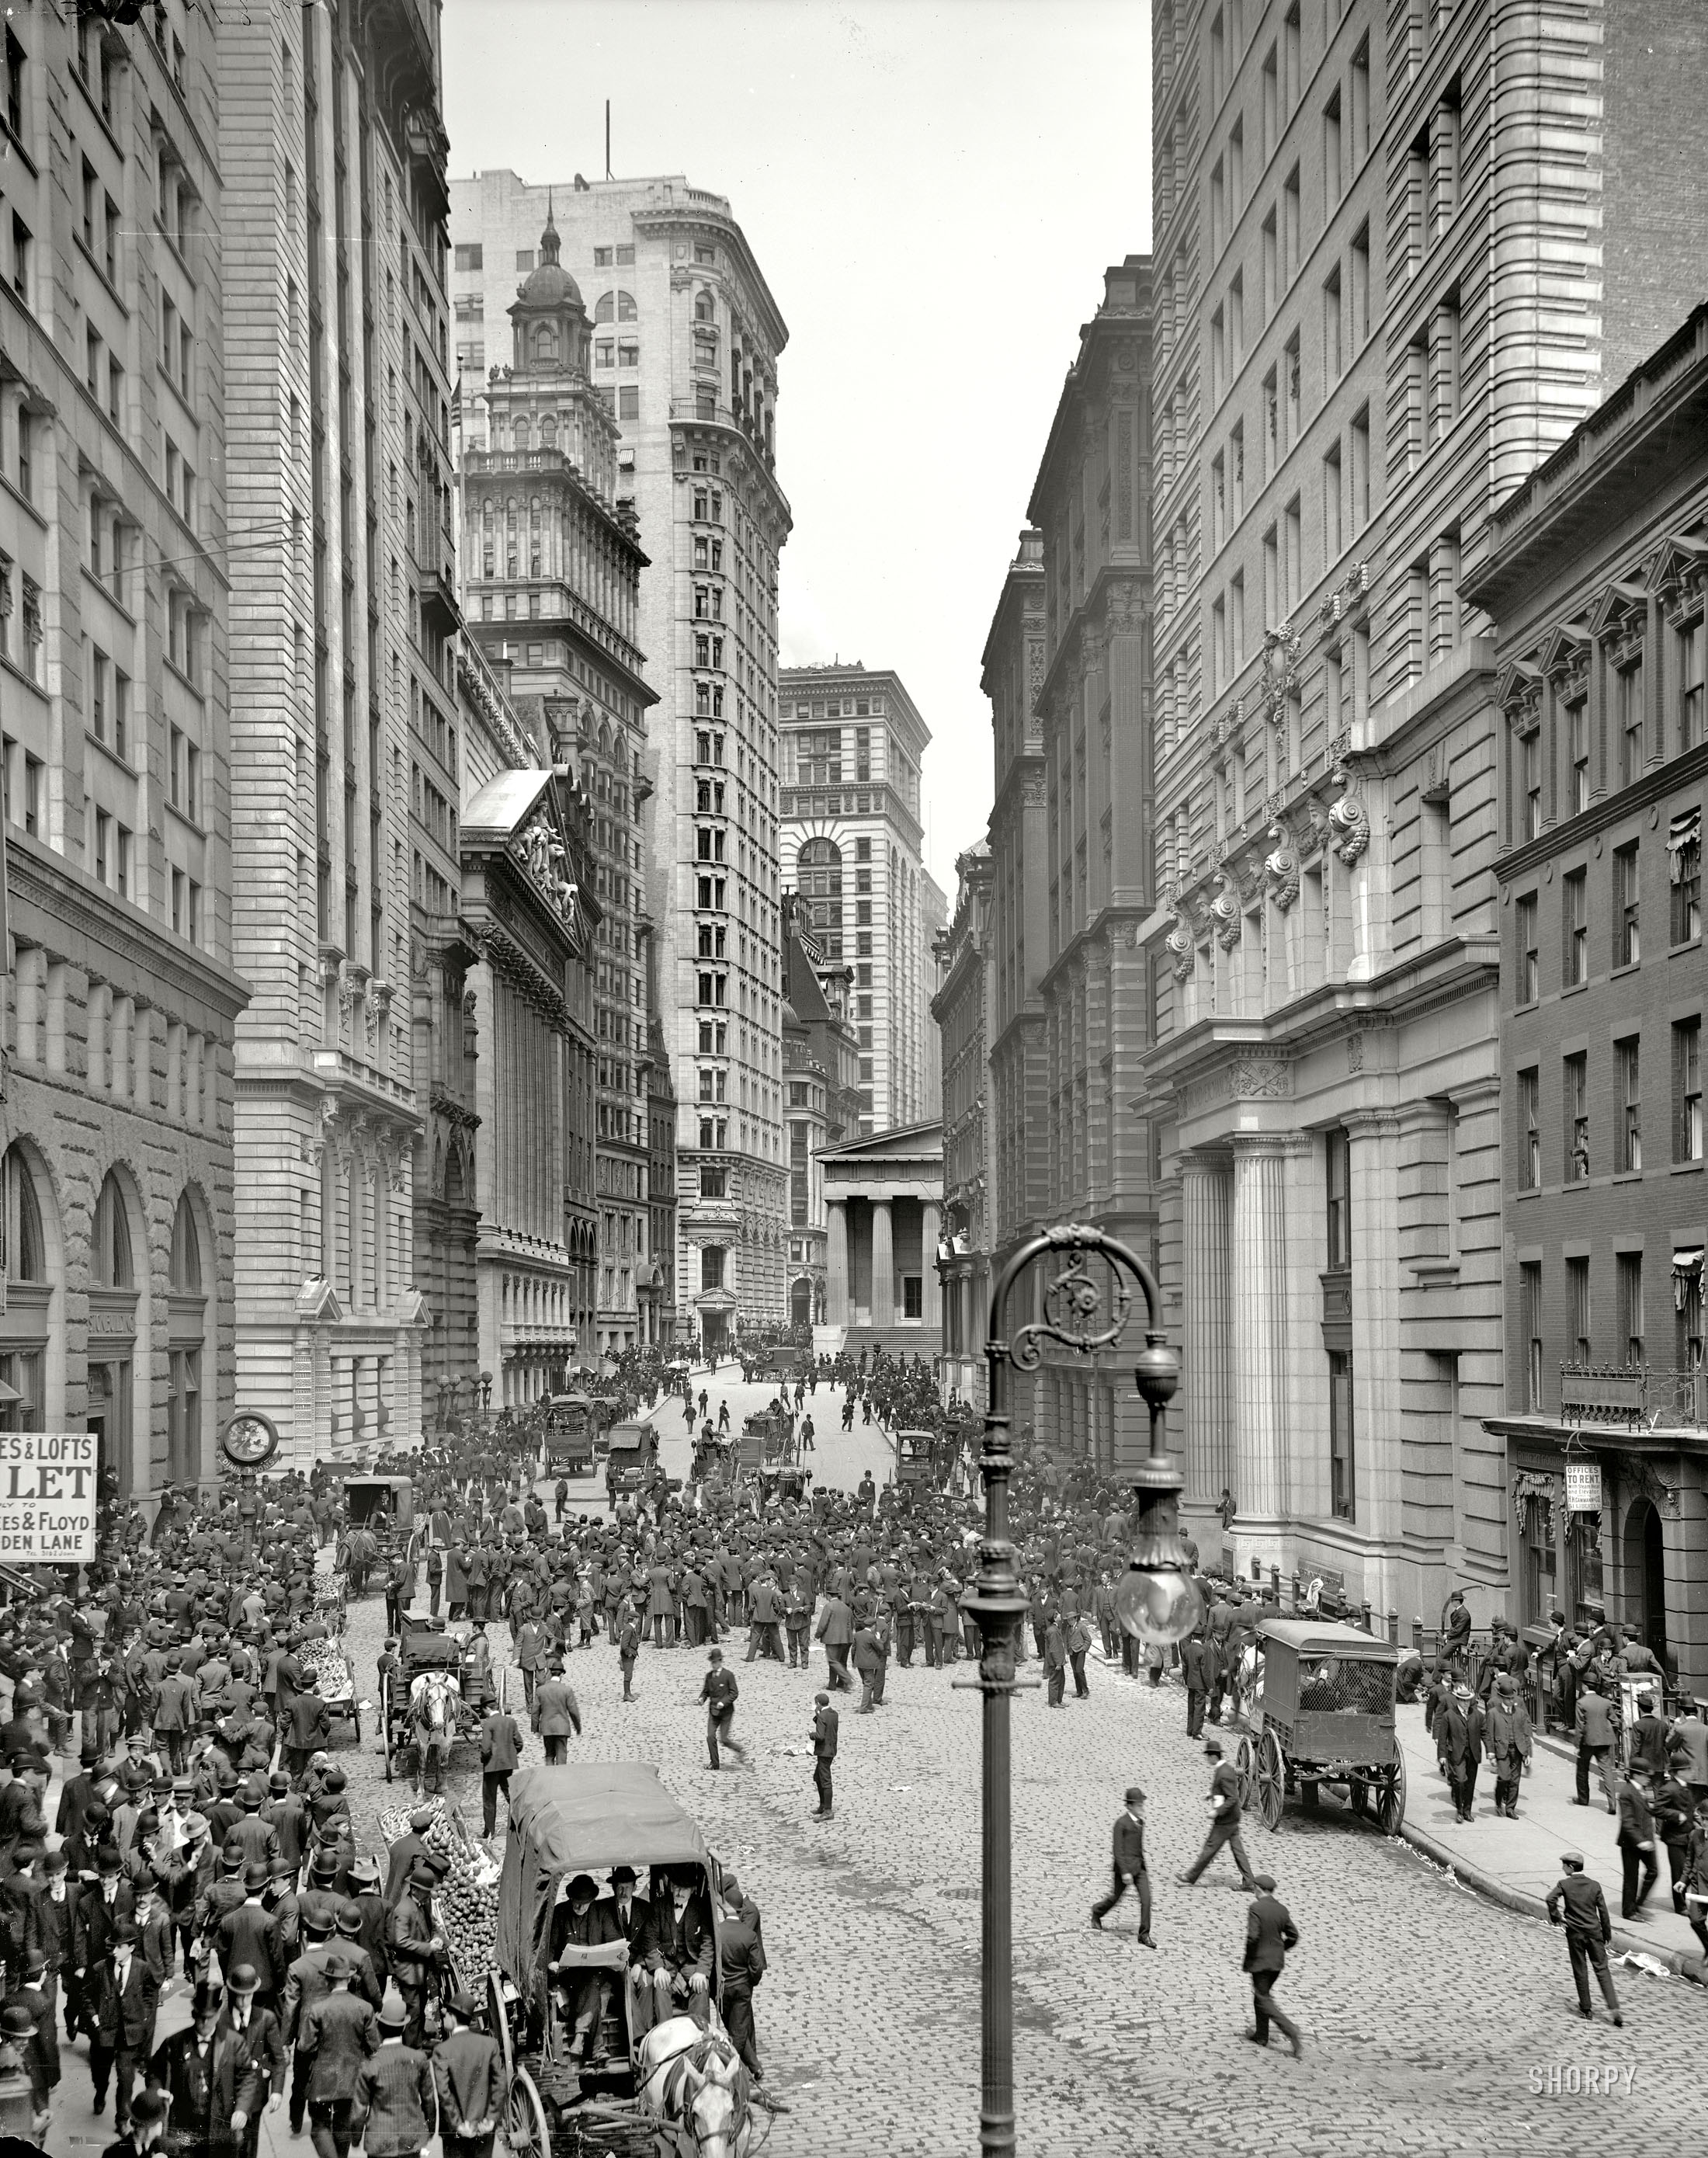 New York circa 1905. "Broad Street exchange and curb brokers." 8x10 inch dry plate glass negative, Detroit Publishing Company. View full size.